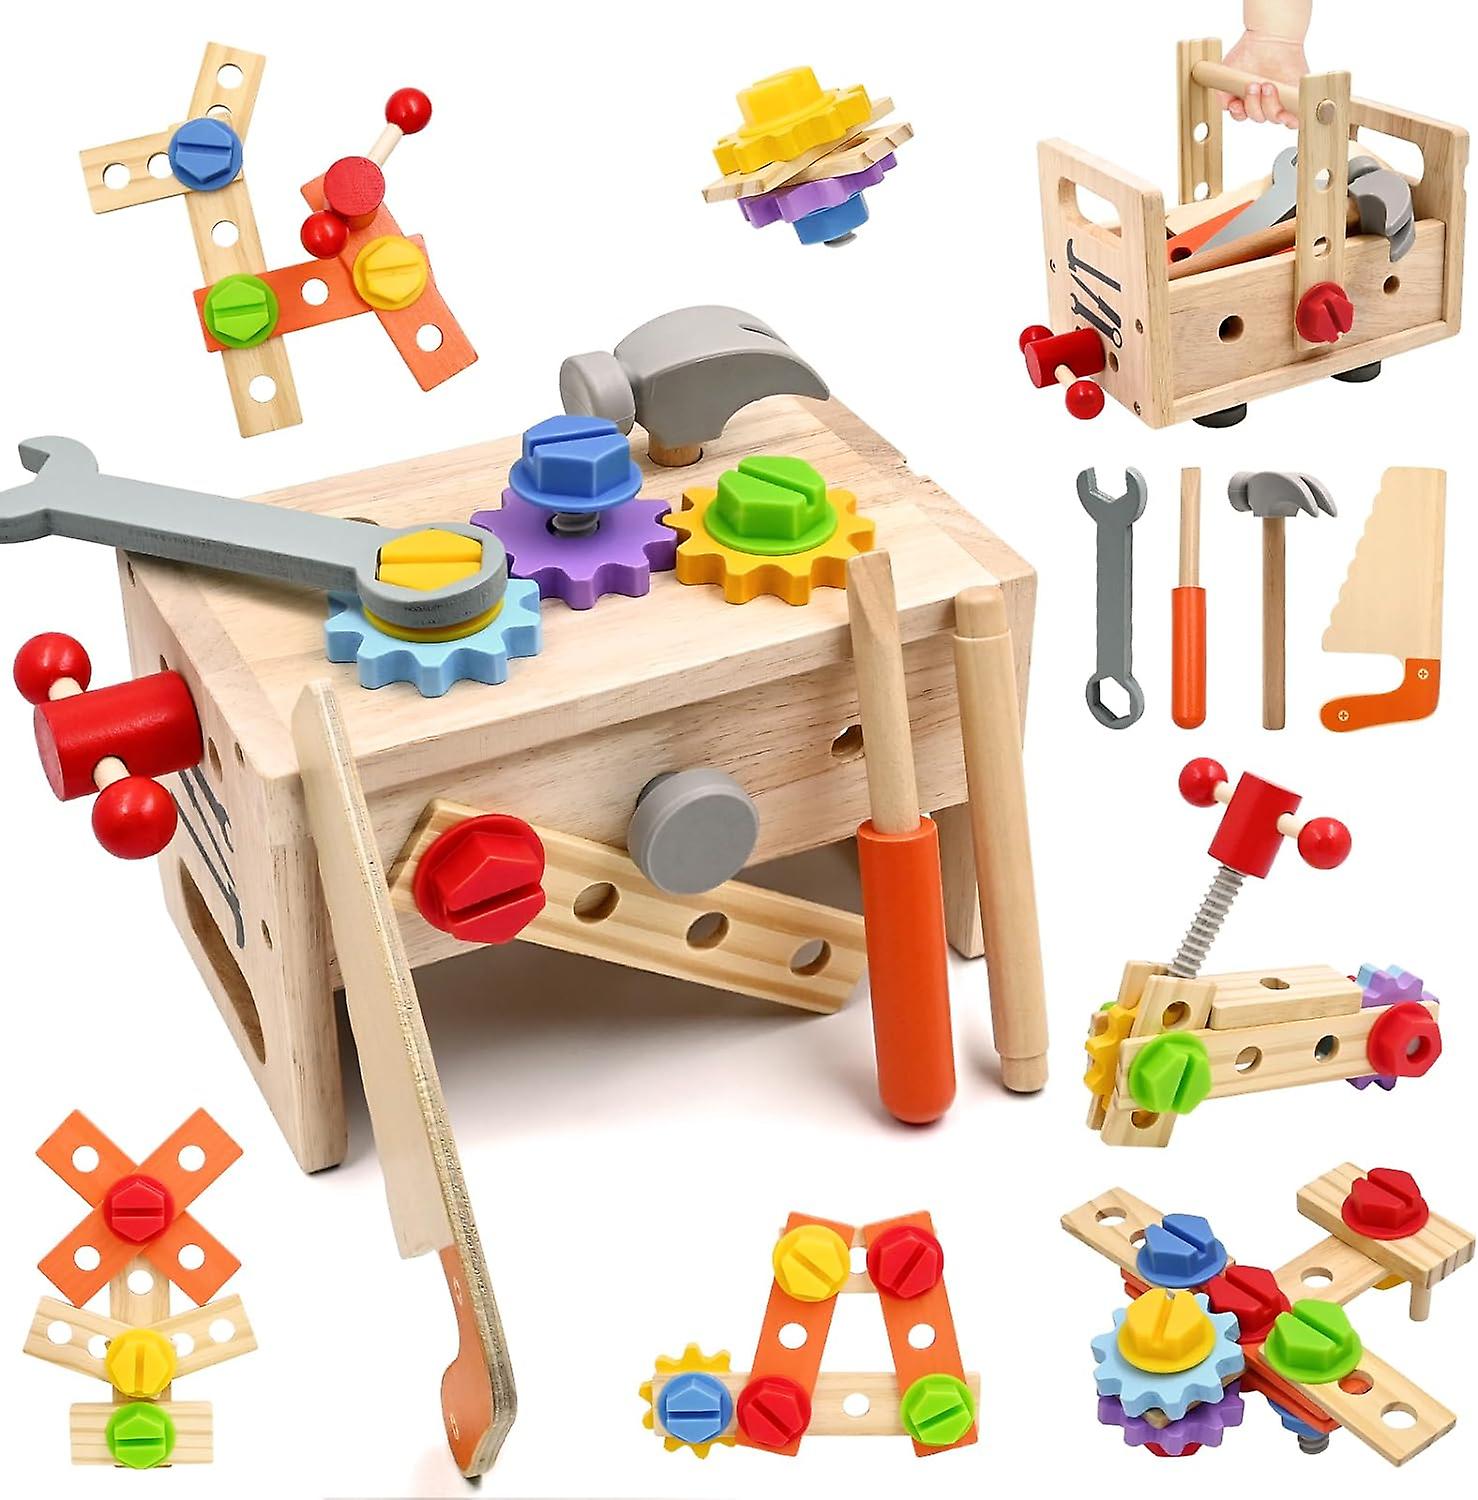 Wooden Toy Tool Case Toys From 3，29 Piece Tool Toy Toddler Games With Tool Box， Educational Role Play Learning Resources Construction Handle Toys Gift